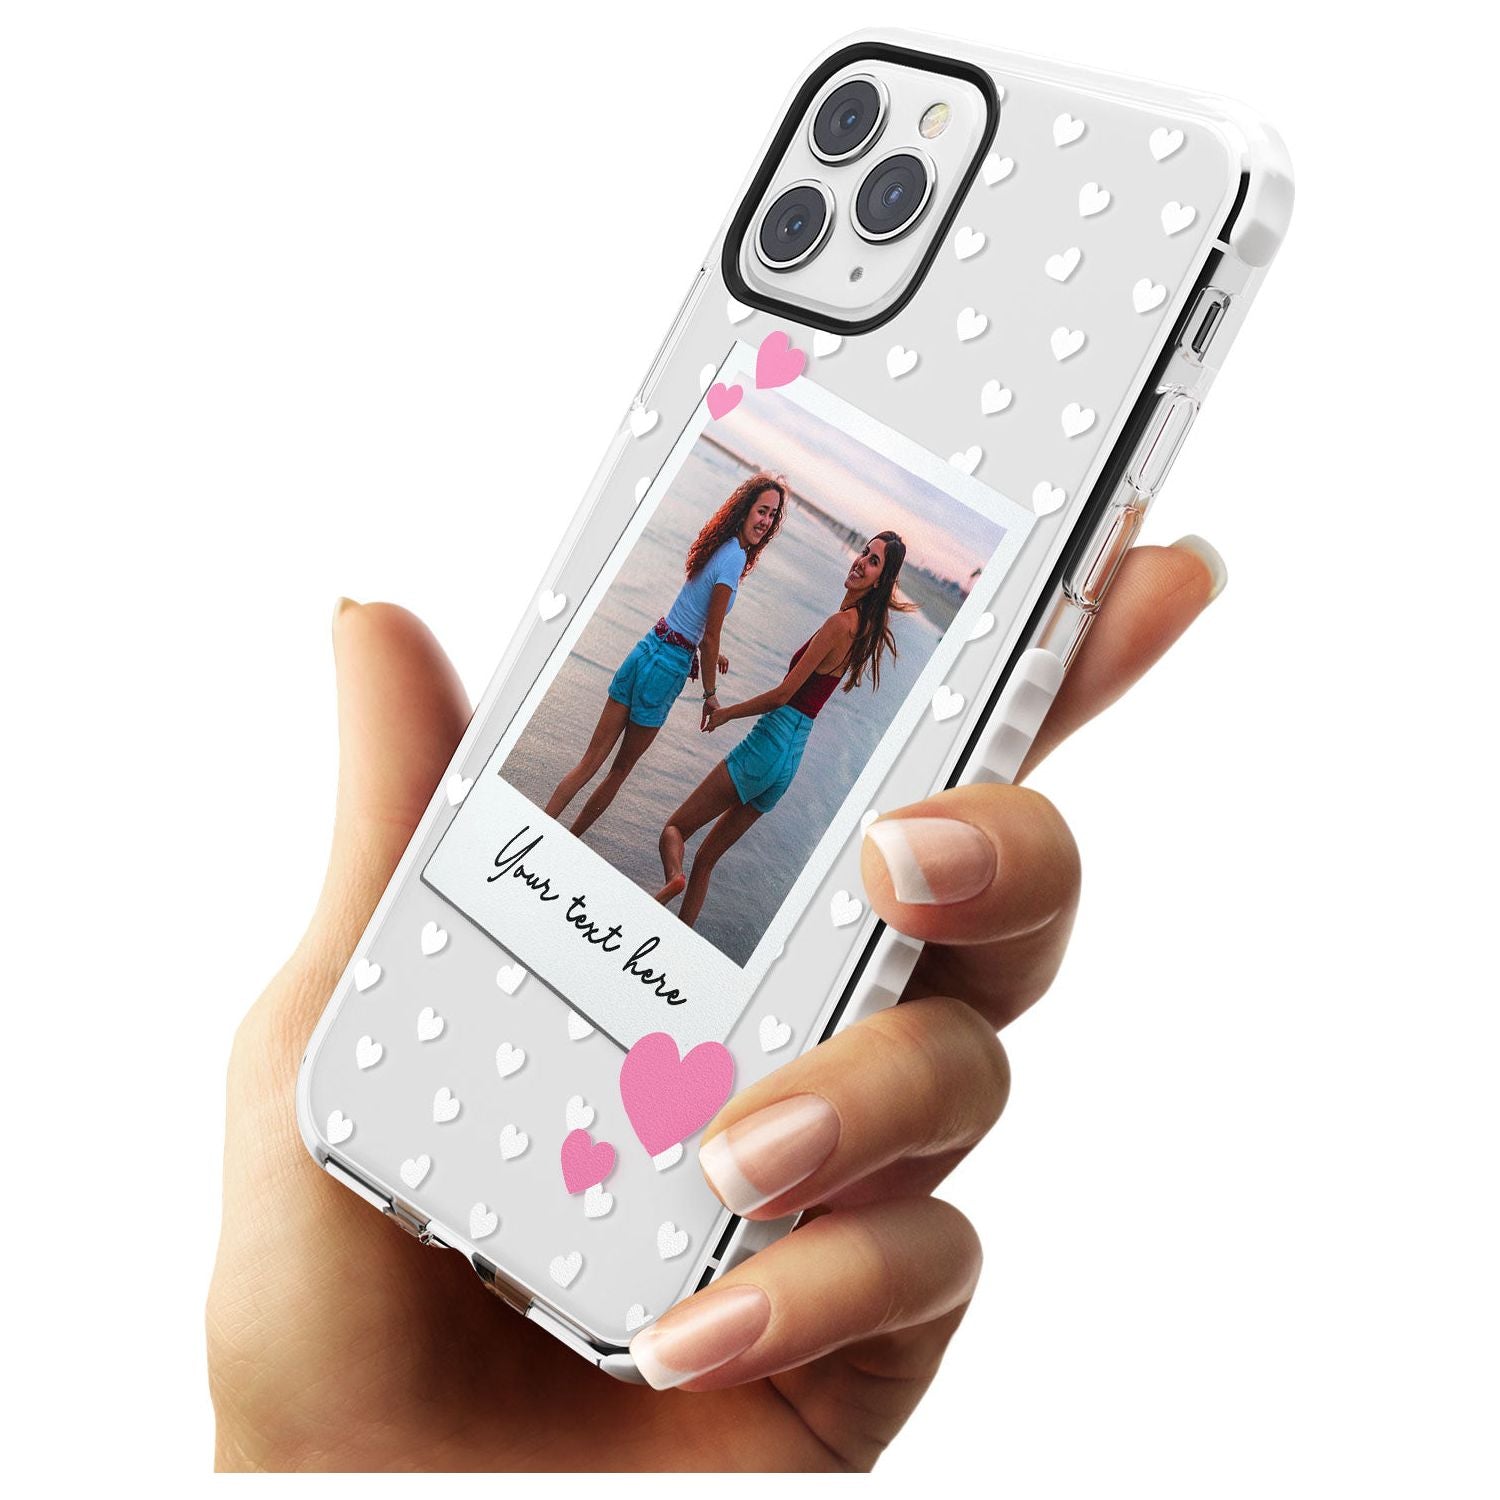 Instant Film & Hearts Slim TPU Phone Case for iPhone 11 Pro Max